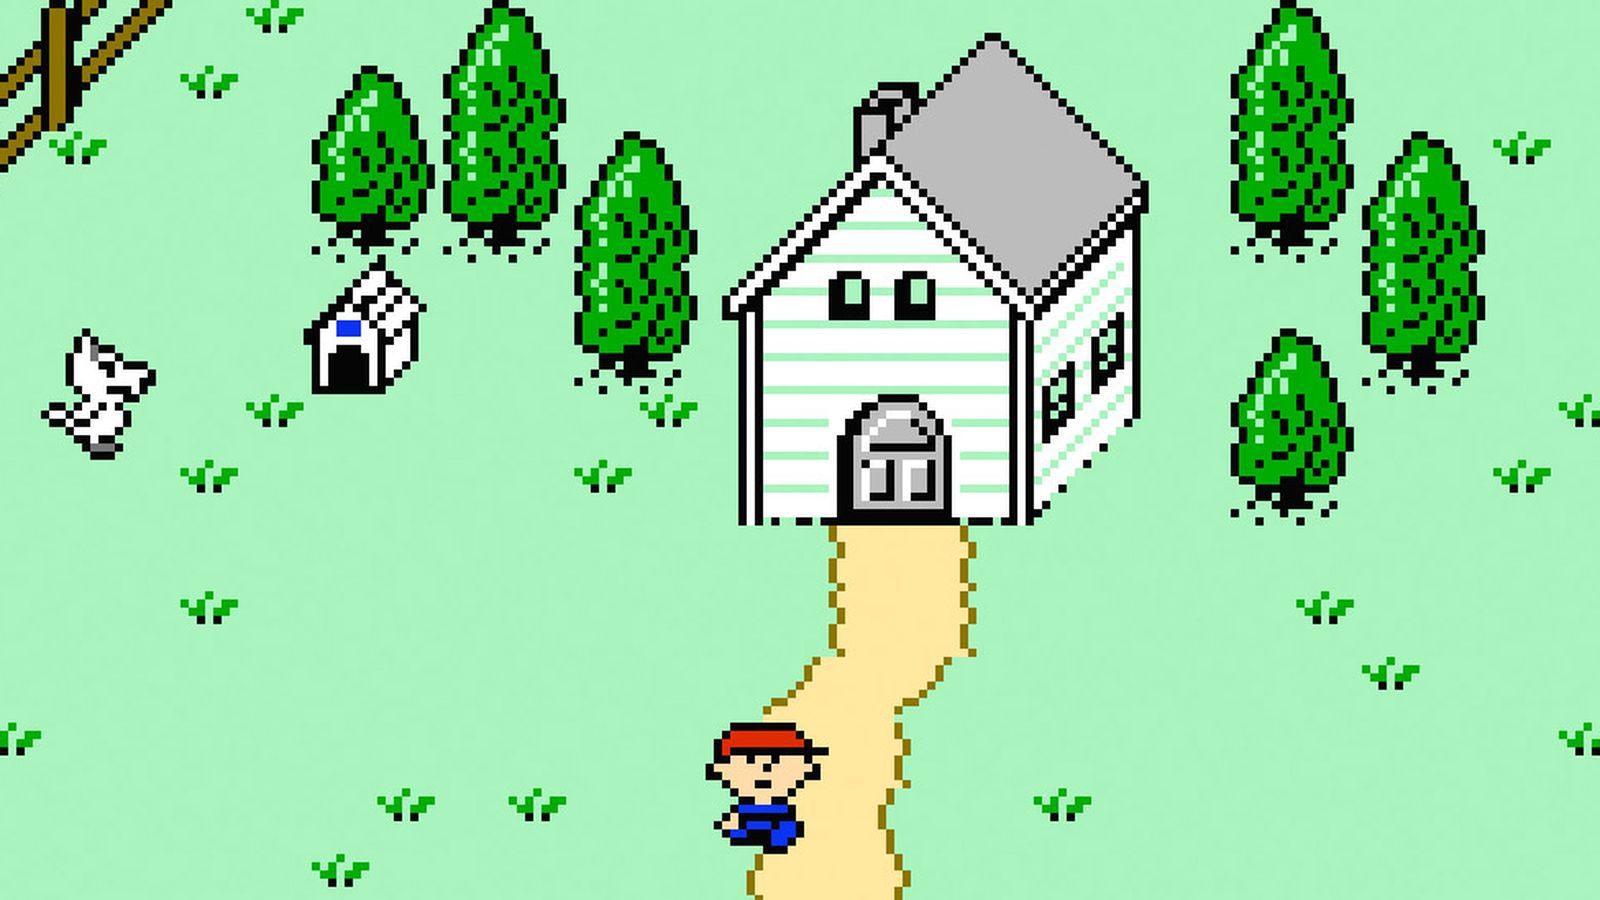 10 Classic Nintendo Games We Wish Were On The NES Classic